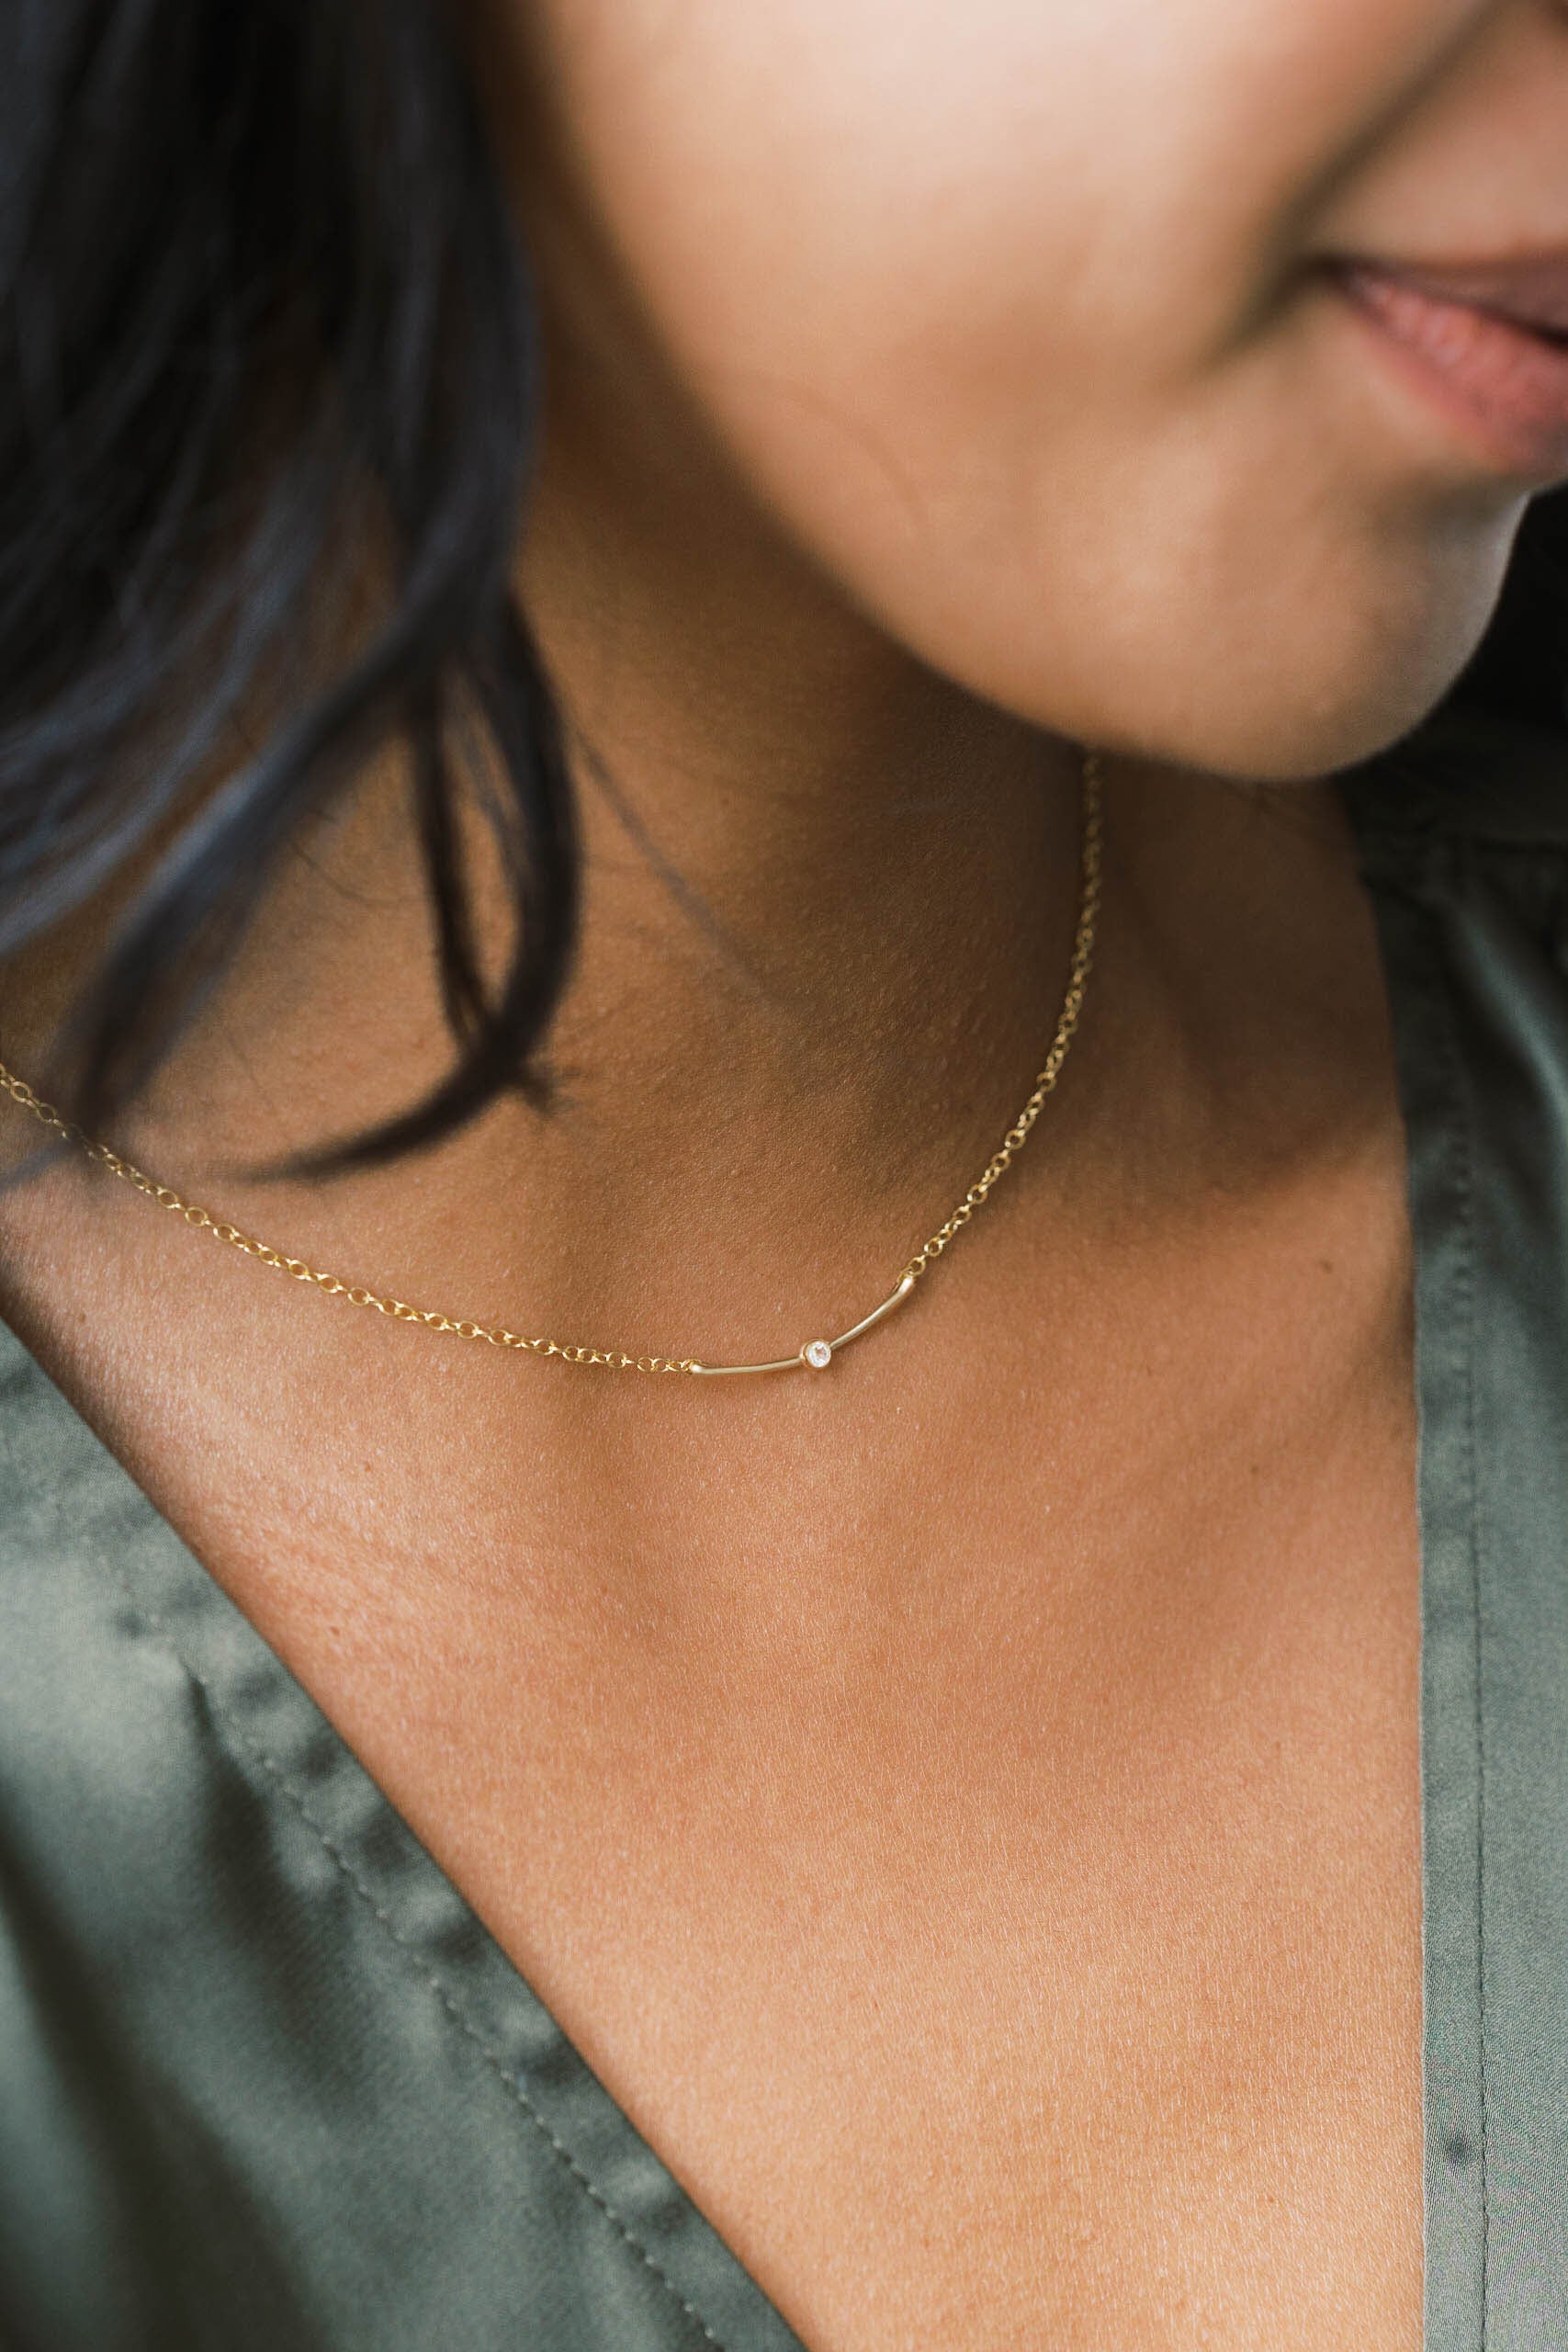 Minimal modern dainty necklace style with a small bar pendant and gemstone.